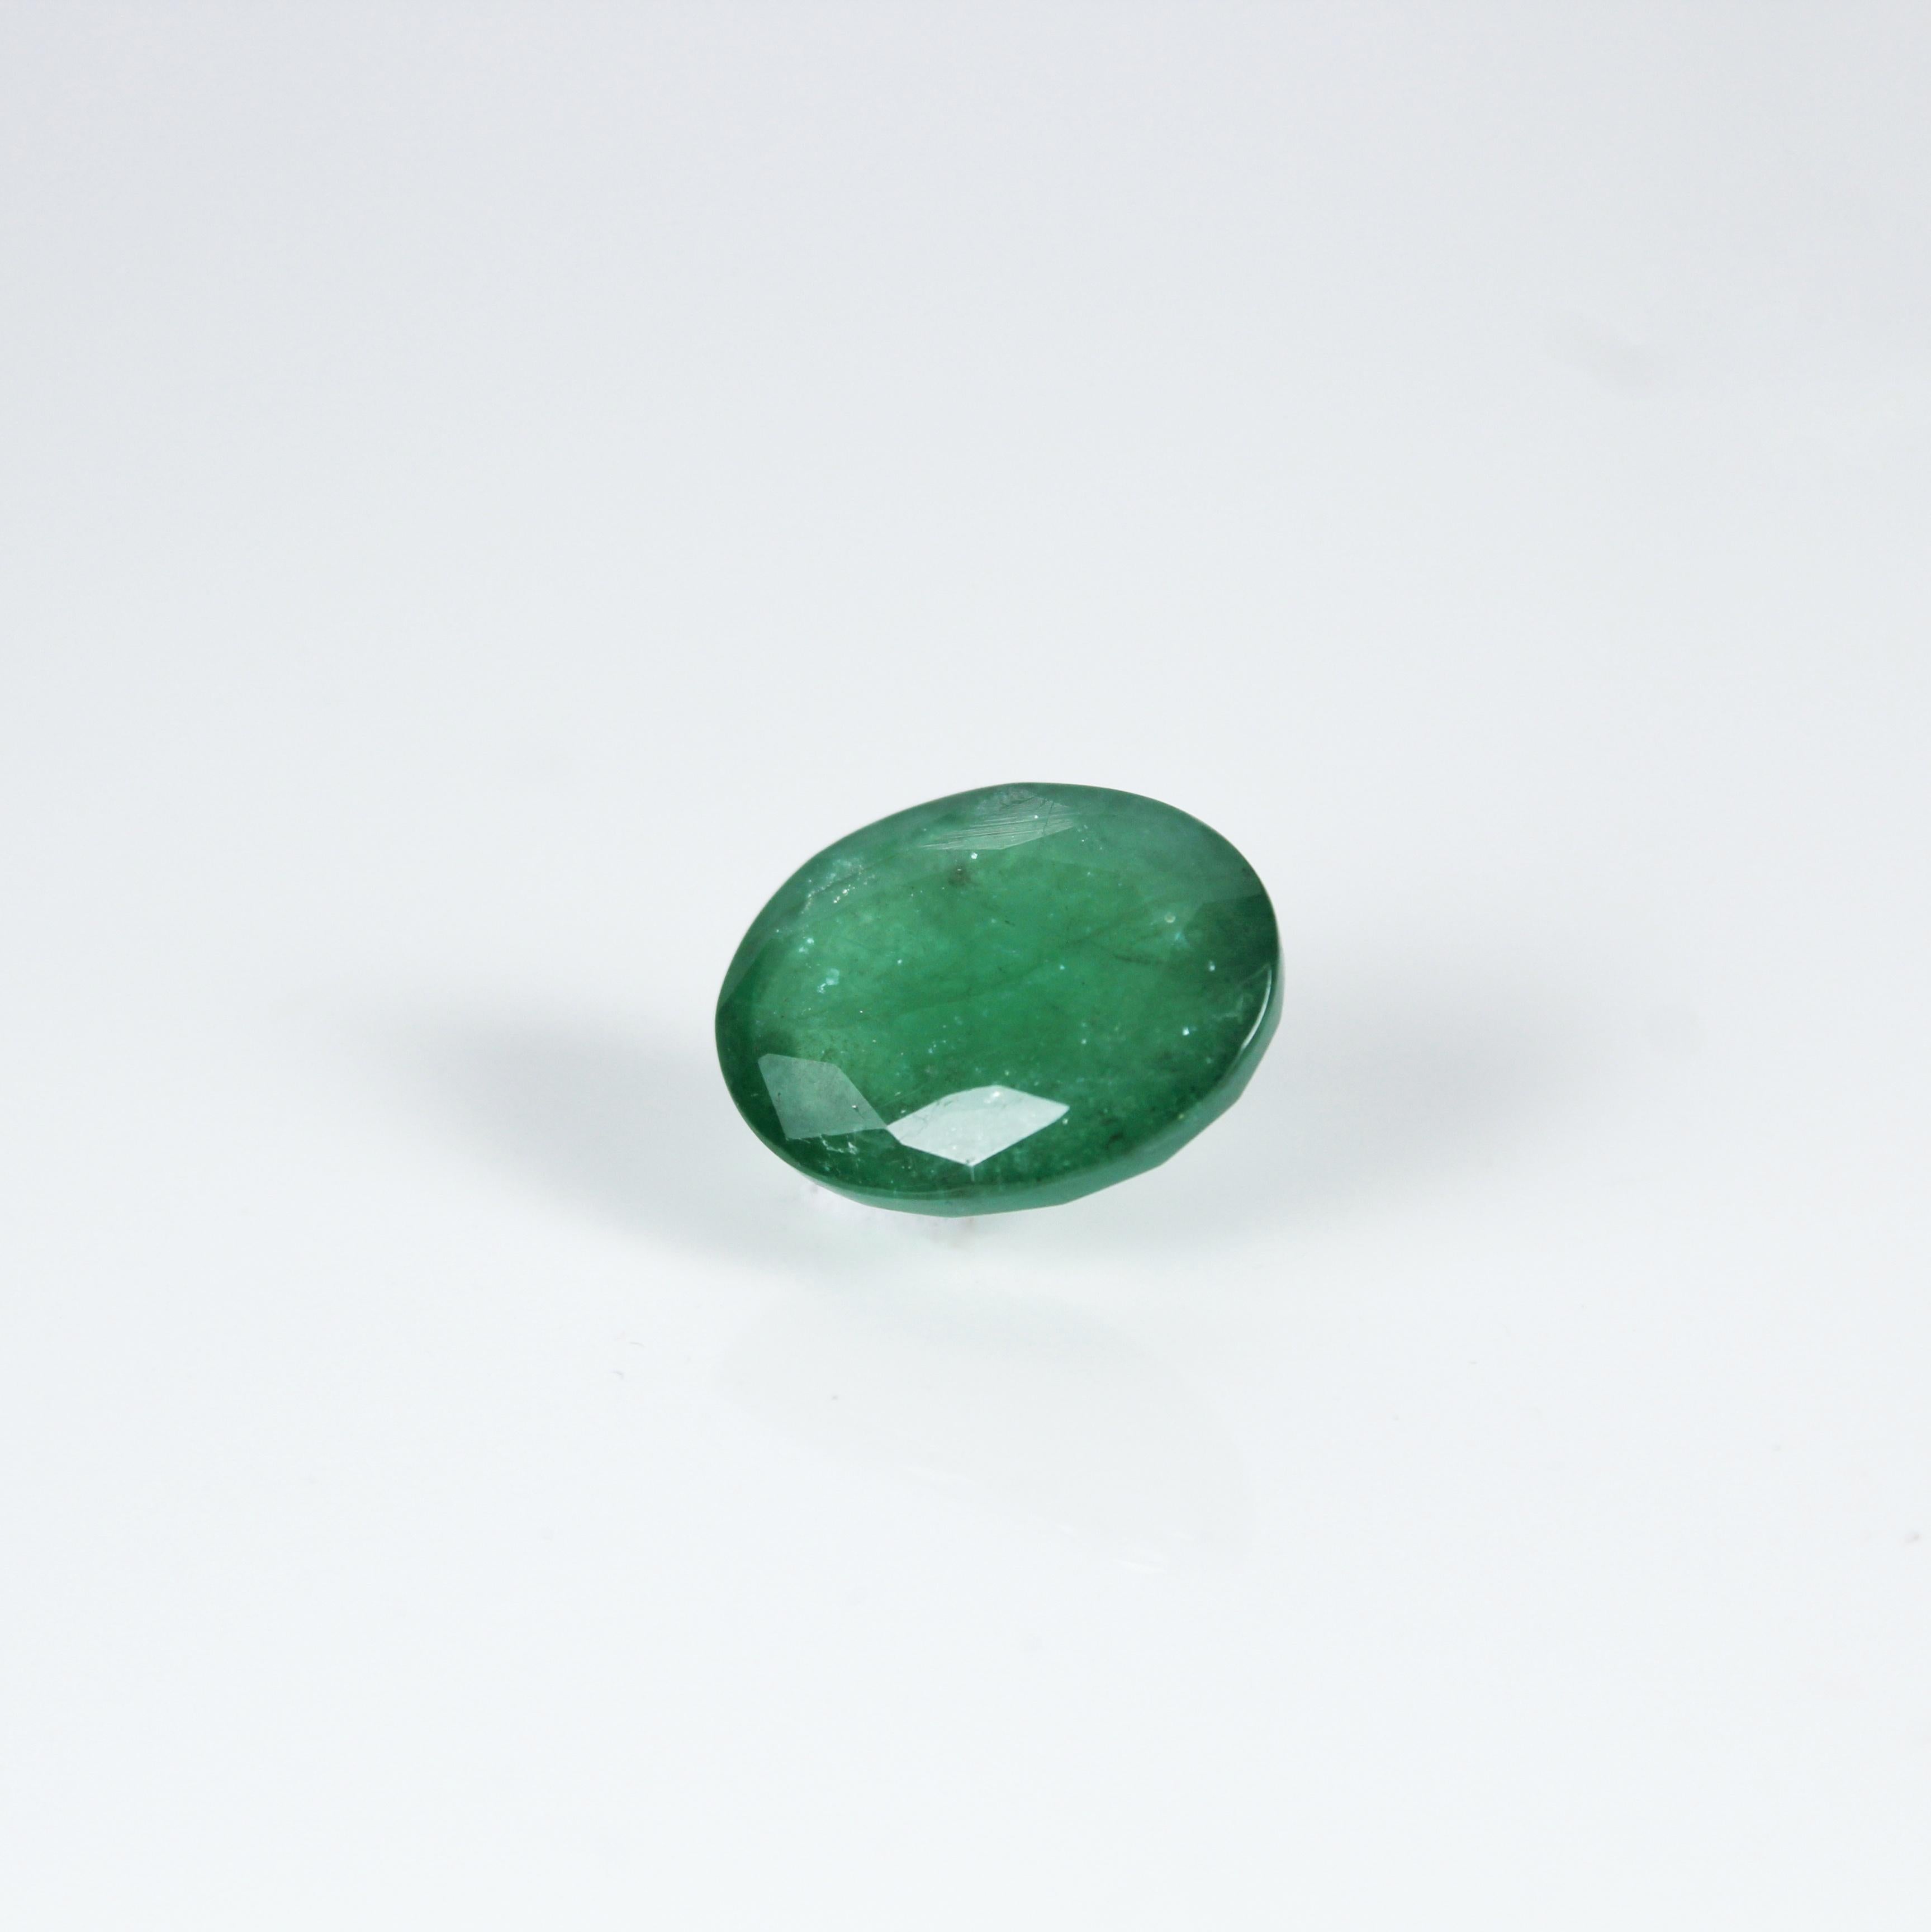 Product Details:

- Species: Natural Beryl
- Variety: Emerald
- Dimensions: 14 x 11 x 4 mm
- Shape / Cut: Oval
- Weight: 7.55
- Clarity: Semi - Transparent
- Color: Dark Green

This beautiful natural emerald is perfect for making ring or delicate